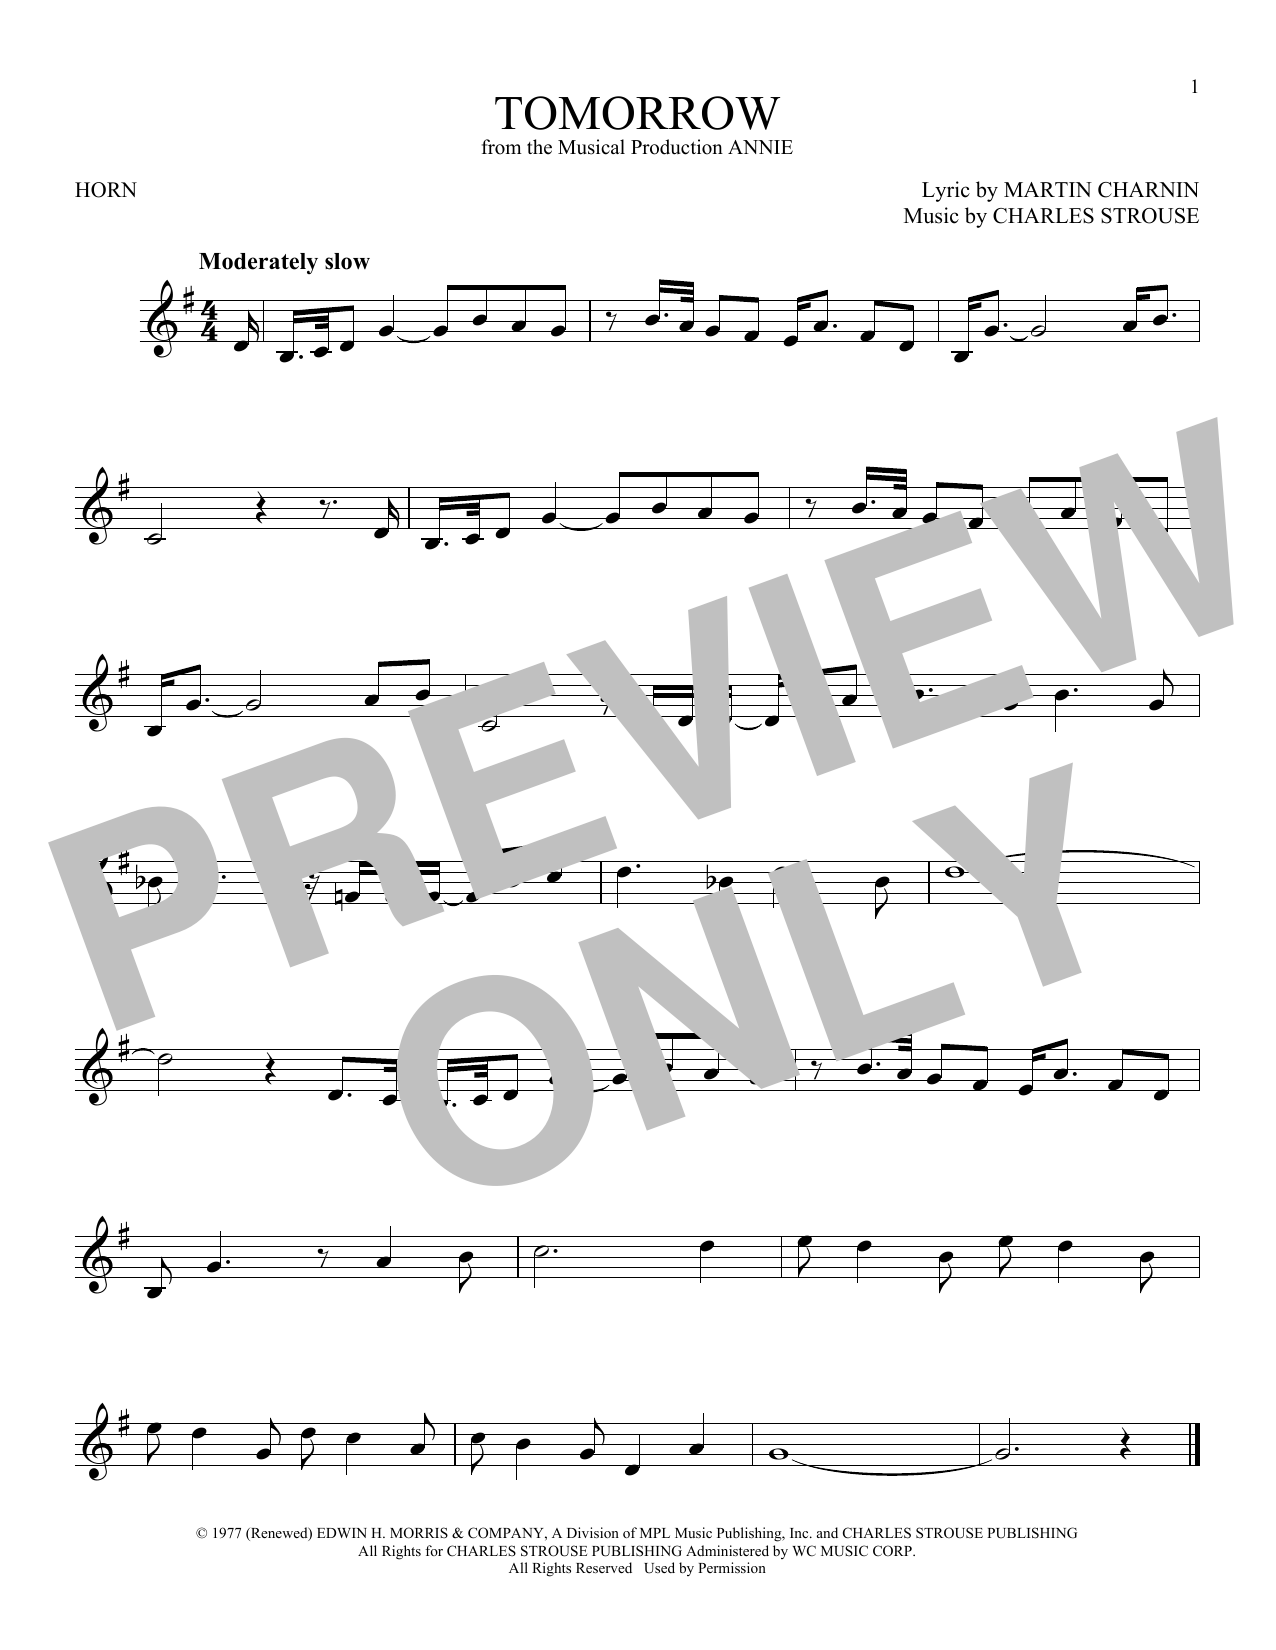 Download Charles Strouse Tomorrow Sheet Music